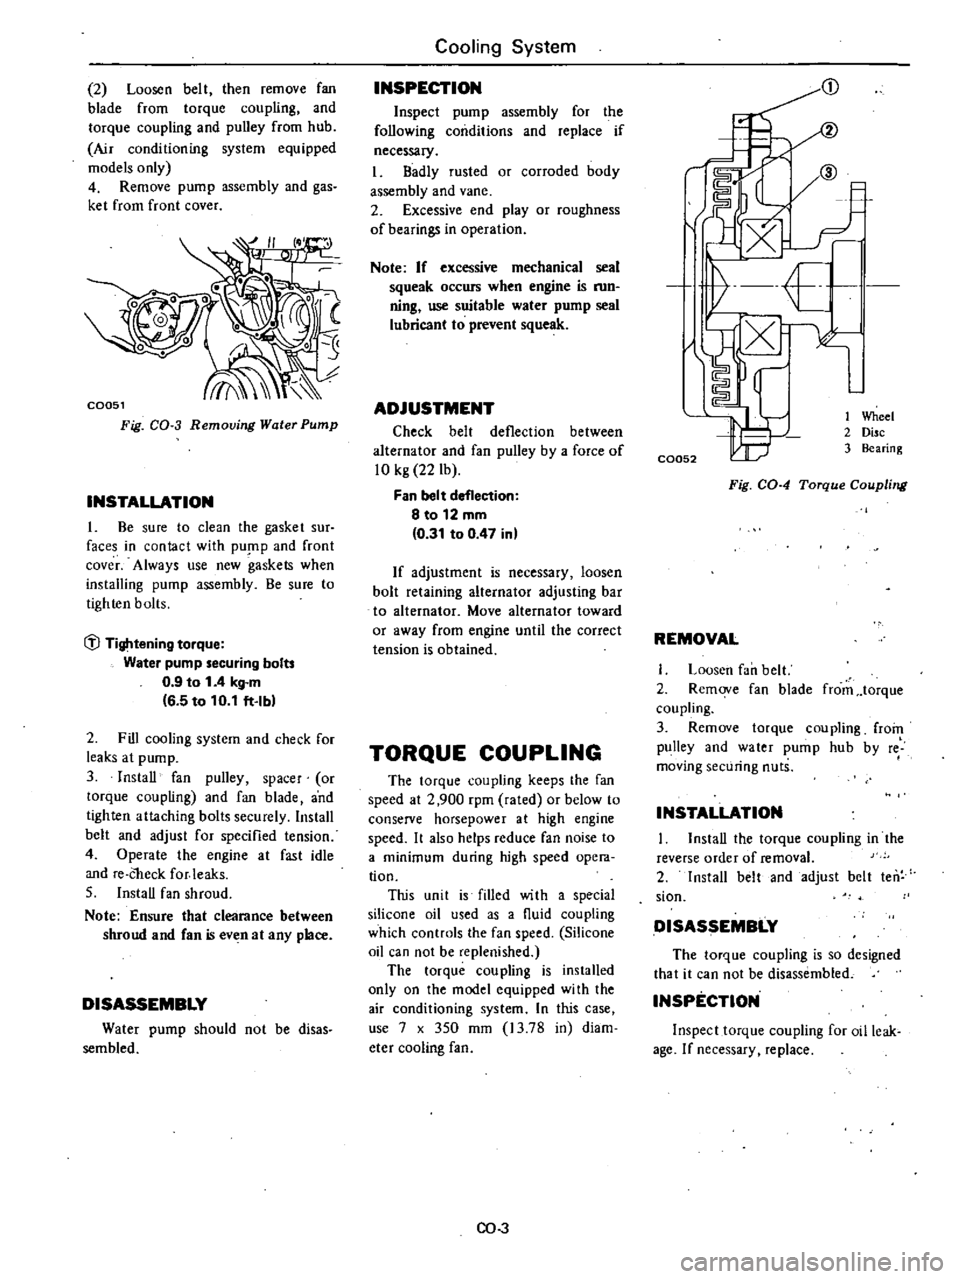 DATSUN 210 1979  Service Manual 
2 
Loosen

belt 
then 
remove 
fan

blade 
from

torque 
coupling 
and

torque 
coupling 
and

pulley 
from

hub

Air

conditioning 
system 
equipped

models

only

4 
Remove

pump 
assembly 
and

ga